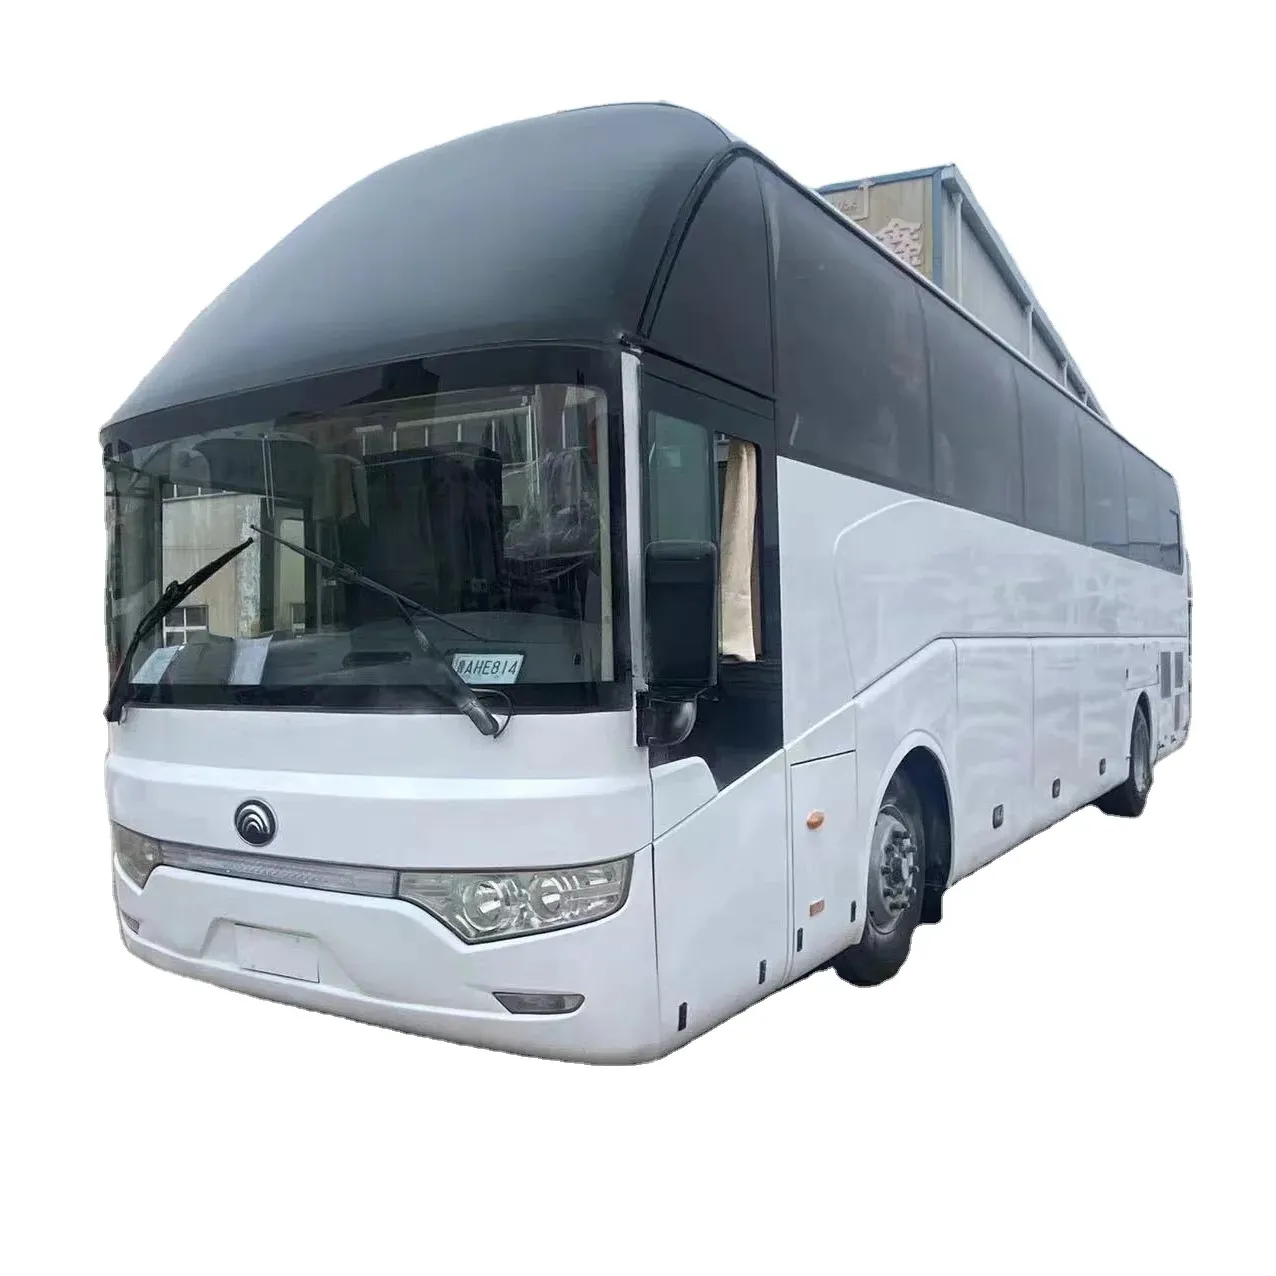 Refurbished 6122 50-65 Seats Coach Buses with bathrooms long-distance Coach Bus for Sale